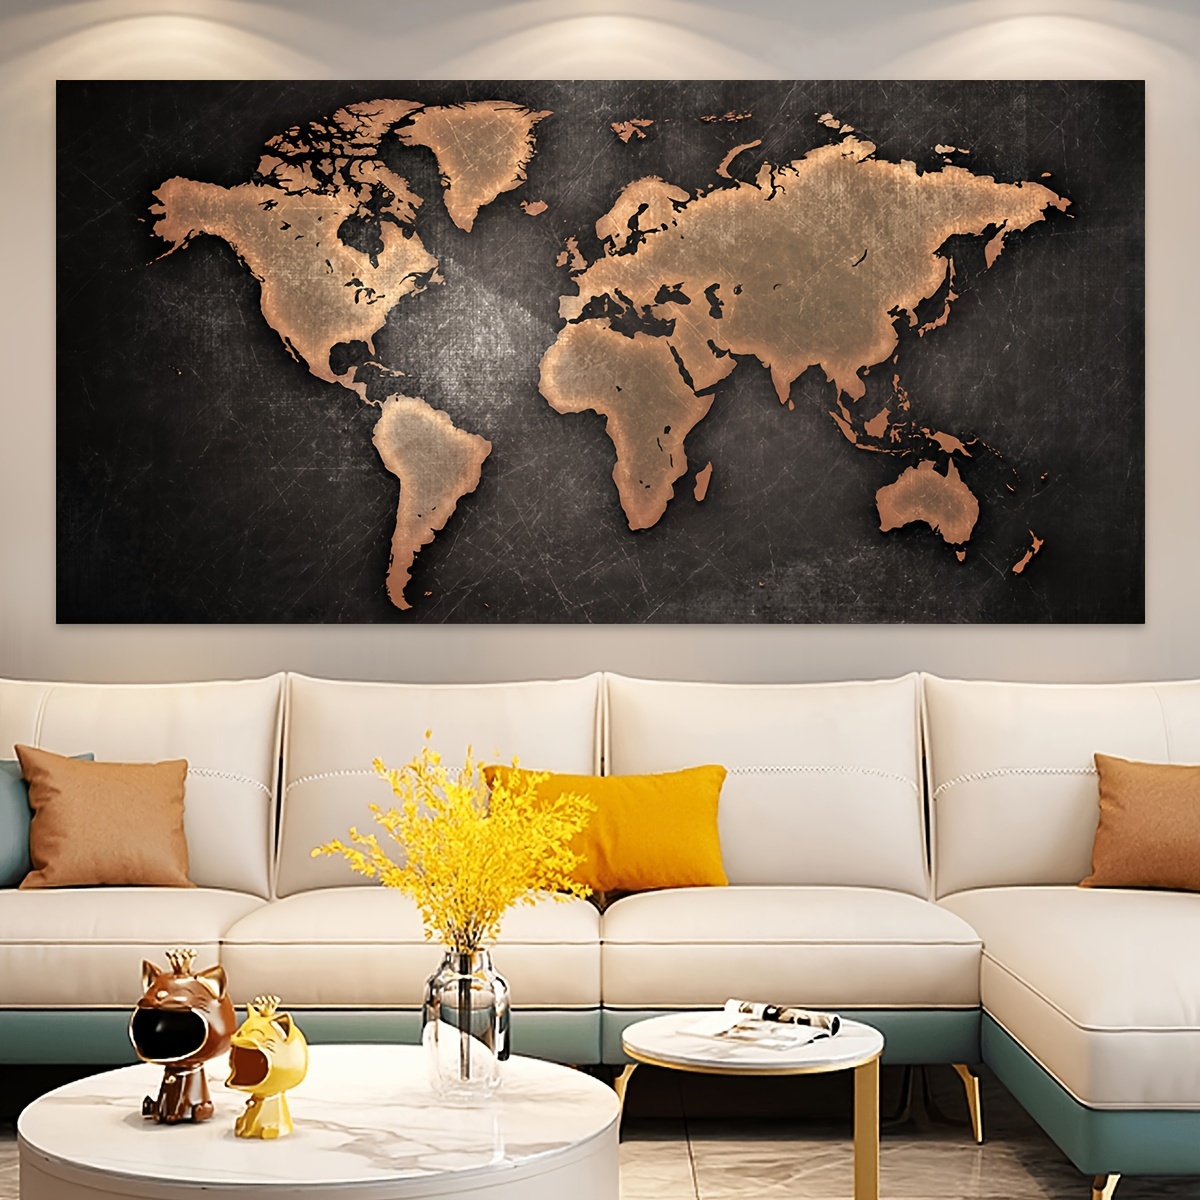 Large World Map Canvas Prints Wall Art Living Room Office 16x32 3 Piece  Green World Map Picture Artwork Decor Home Decoration